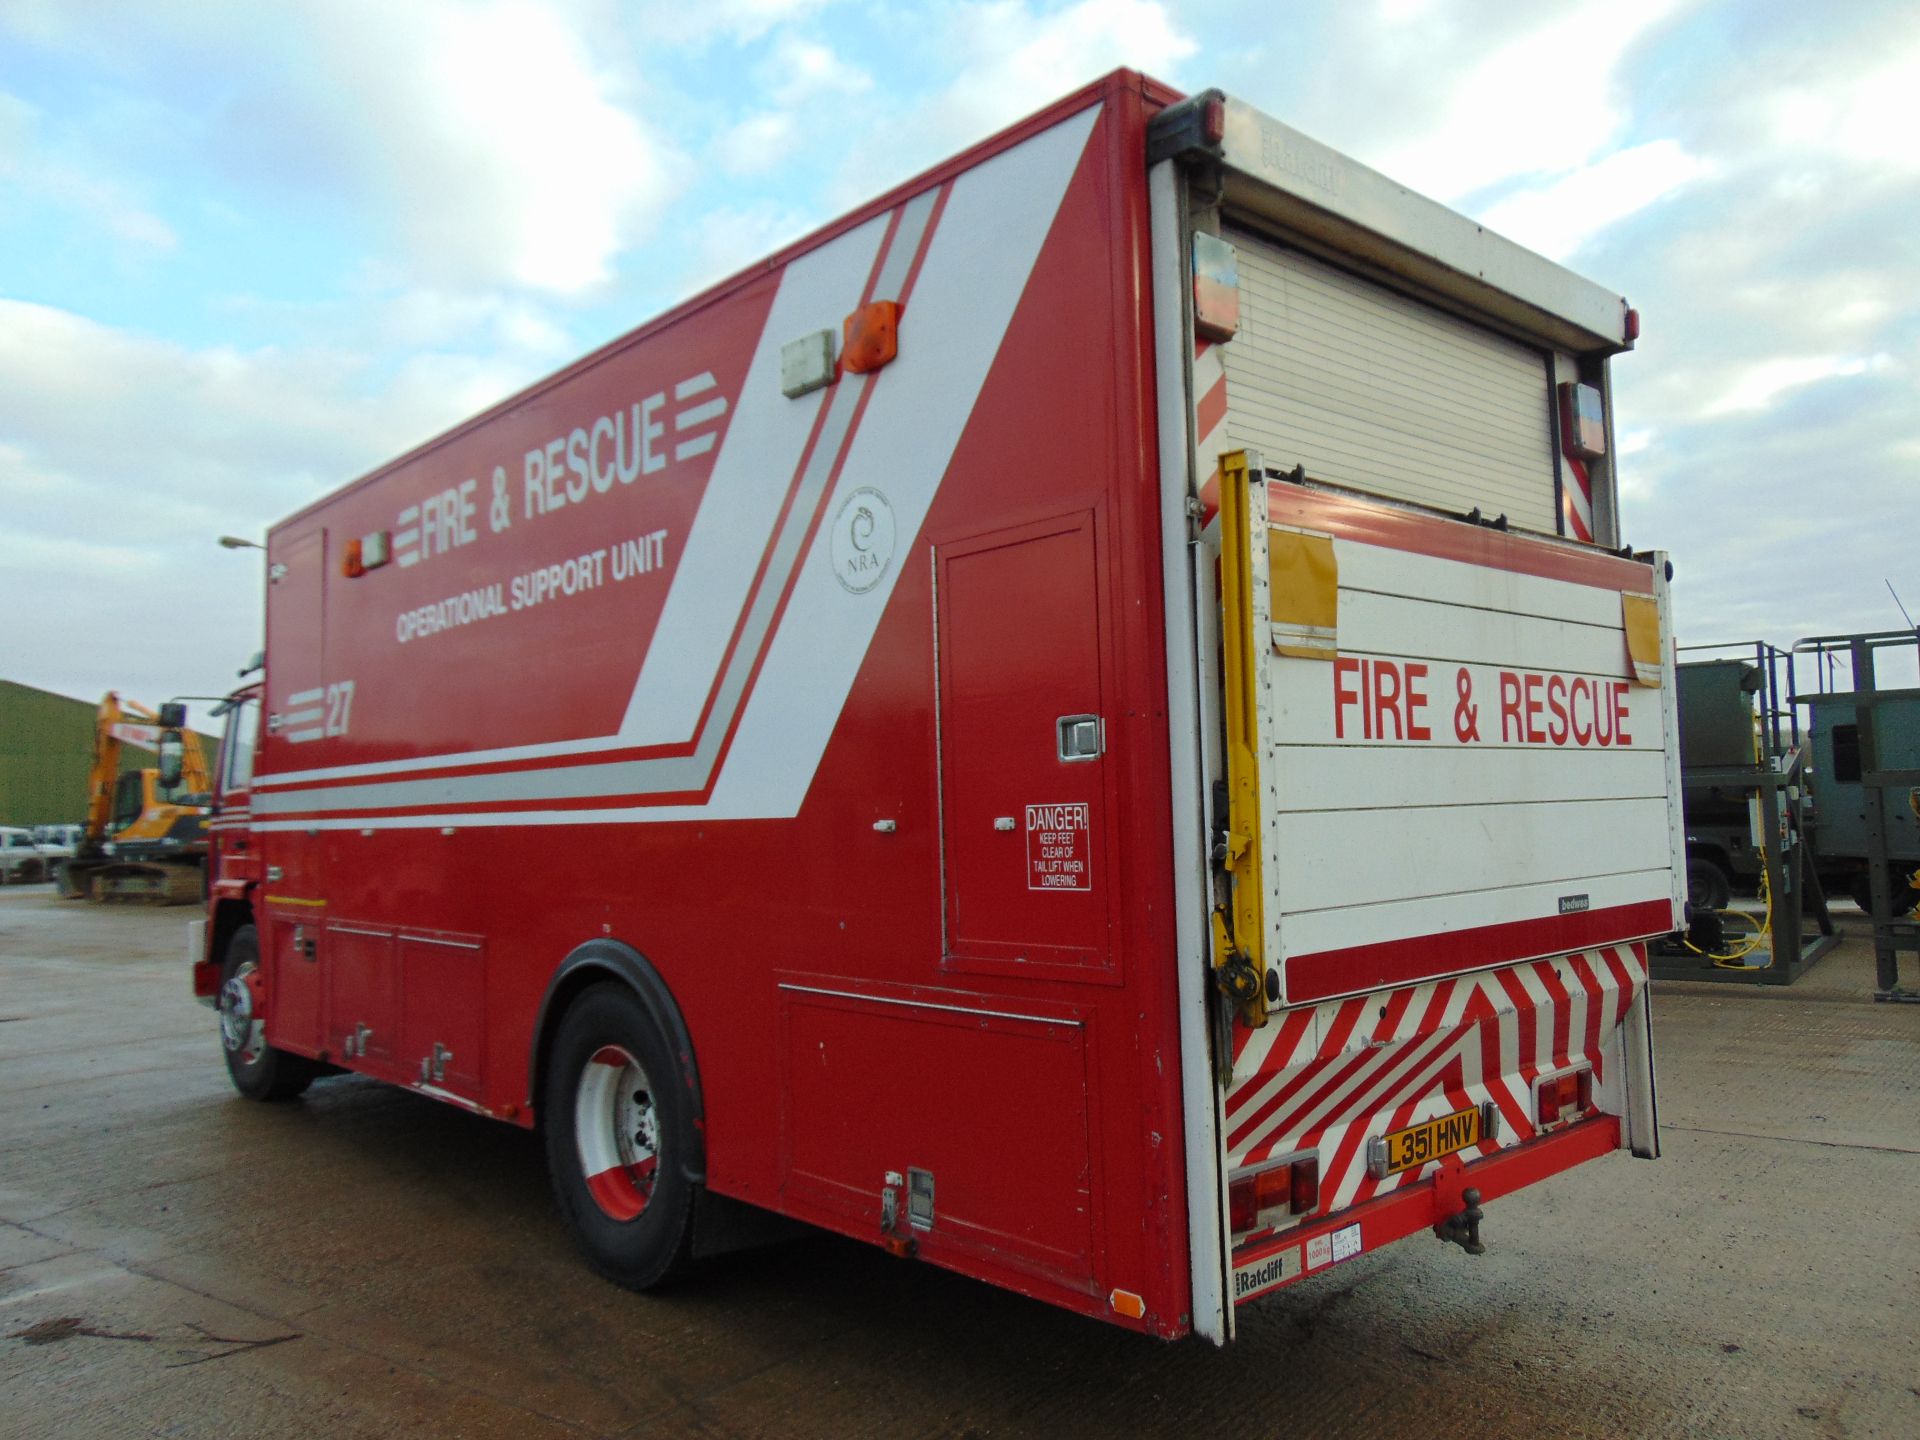 1993 Volvo FL6 18 4 x 2 Incident Response Unit complete with a 1000 Kg Tail Lift - Image 8 of 37